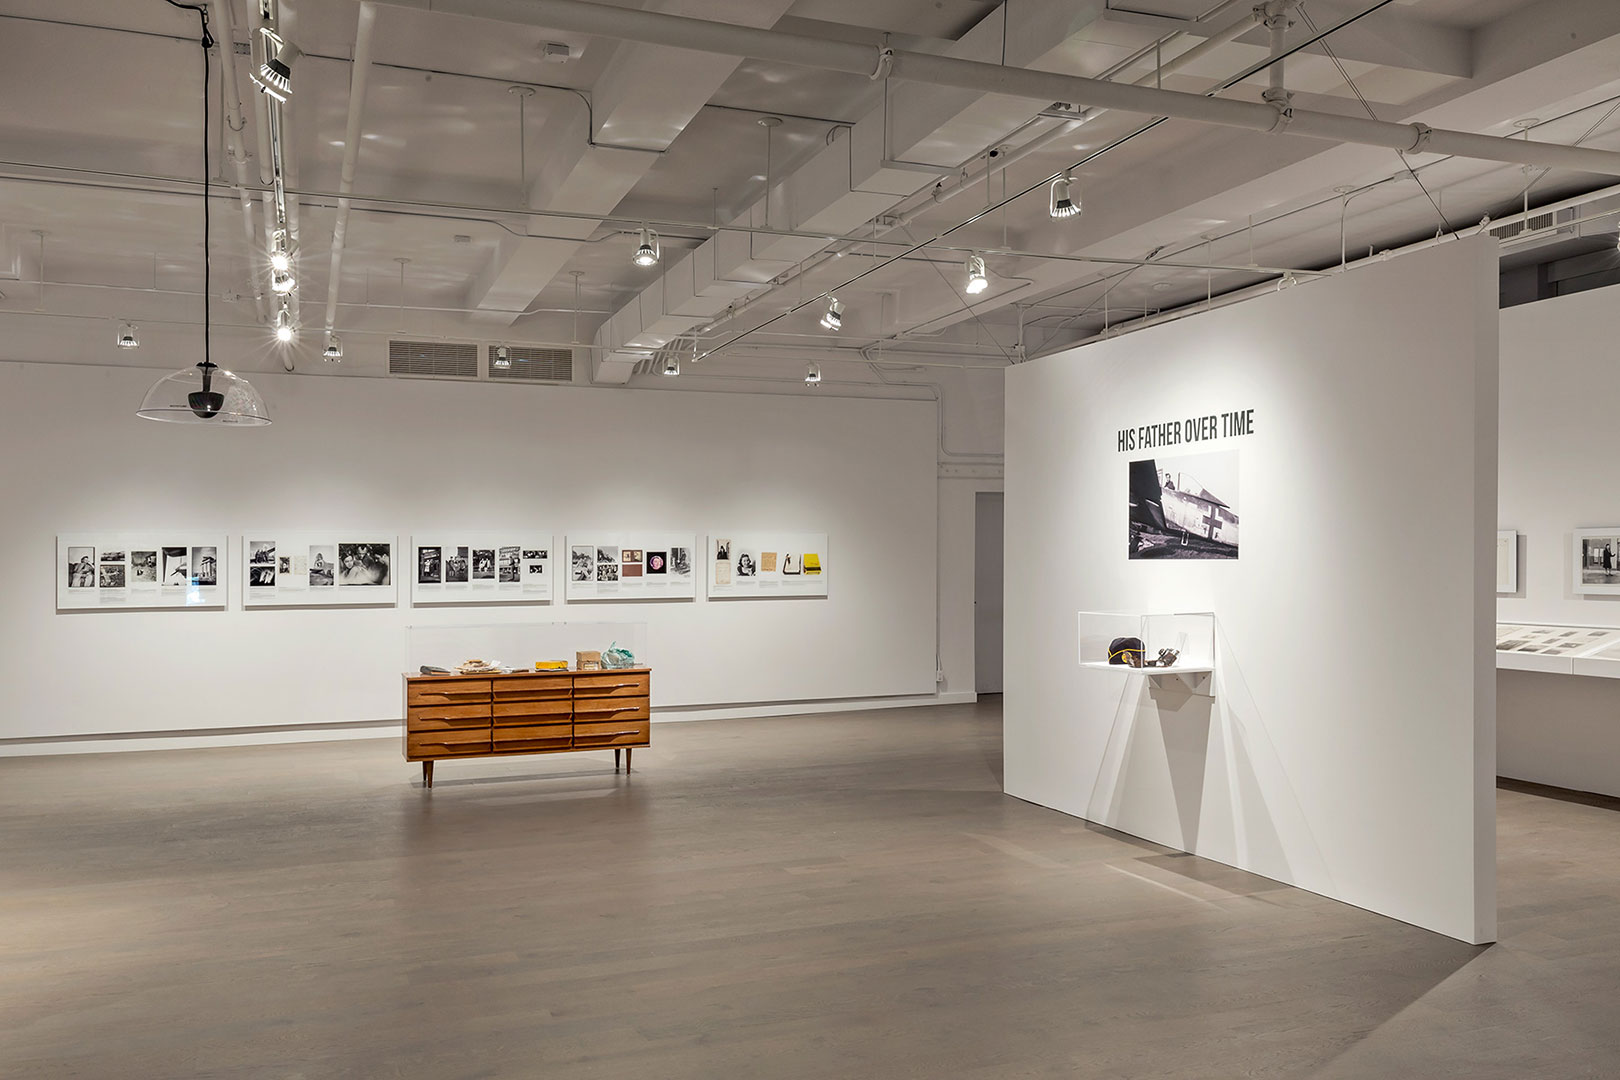 Malka Greene, His Father Over Time (installation view), 2015.